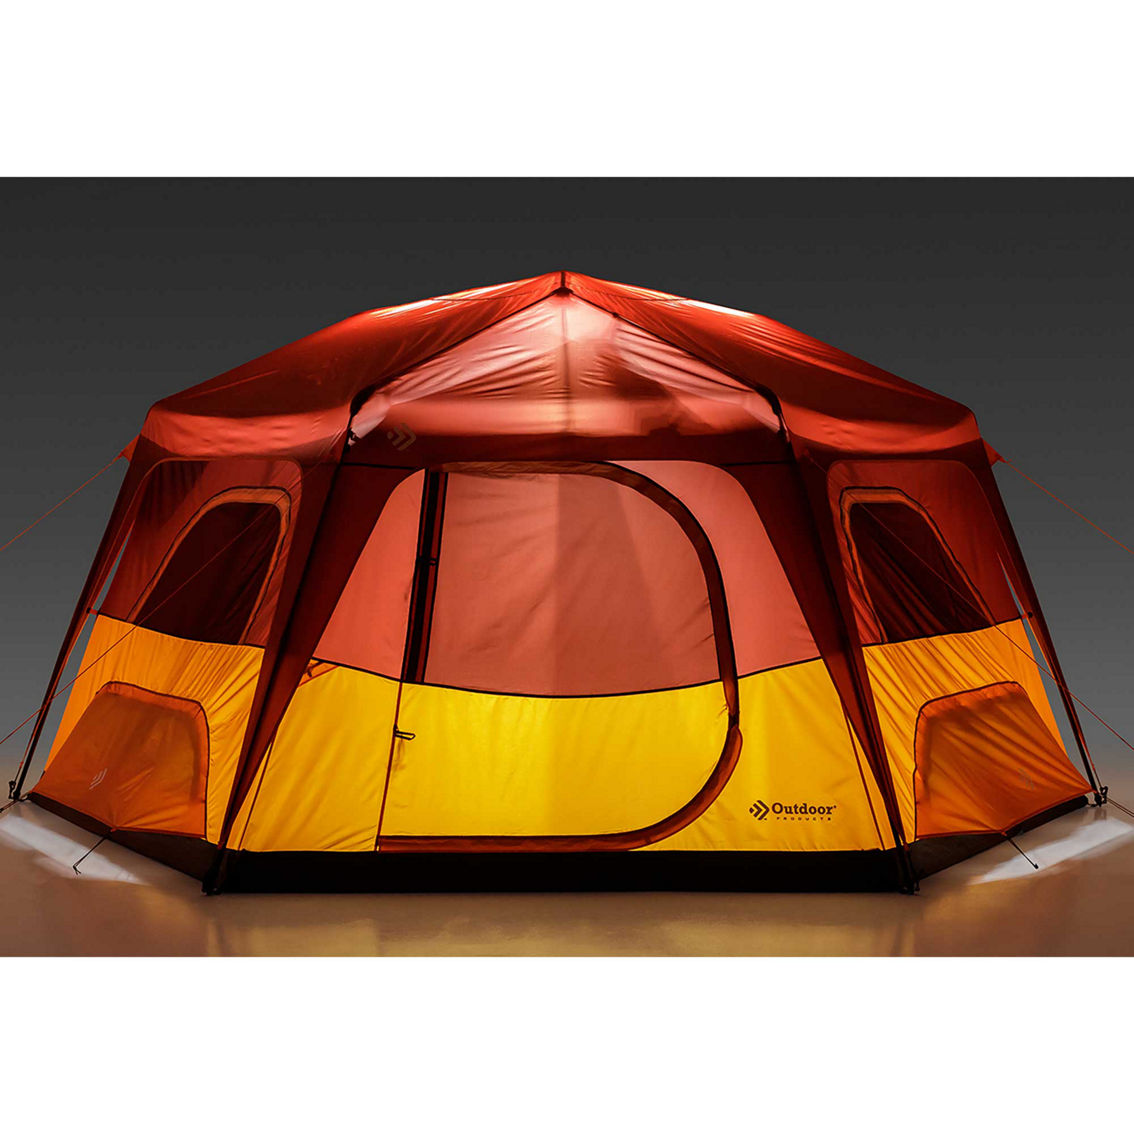 Outdoor Products 8 Person Instant Hexagon Tent with LED Lighted Poles - Image 9 of 10